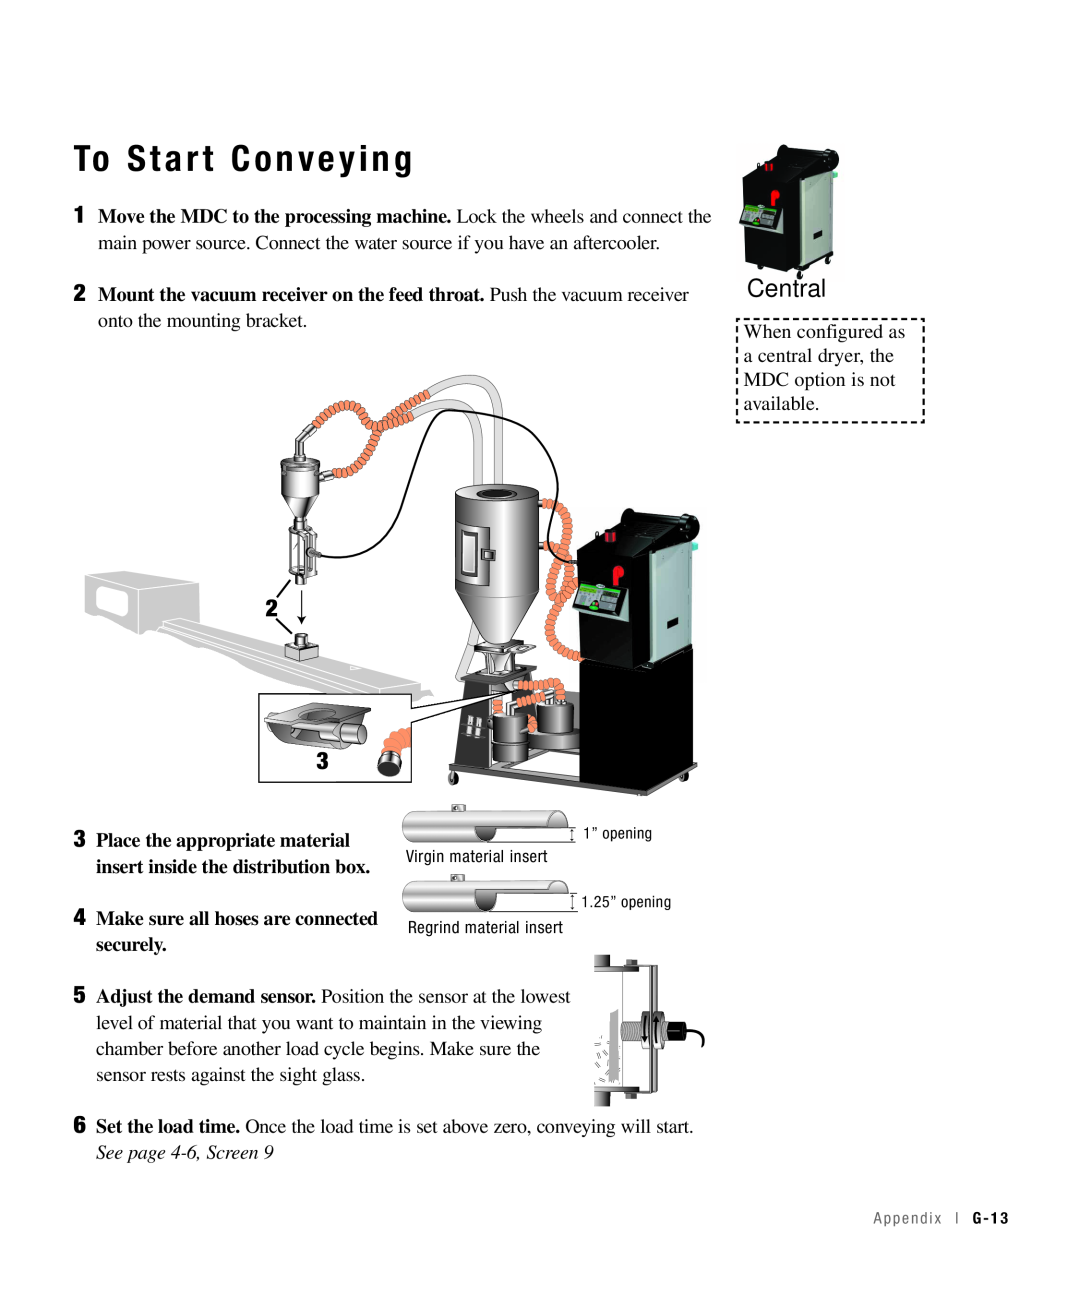 Conair 100, 25, 15, 50 specifications To Start Conveying, Central 